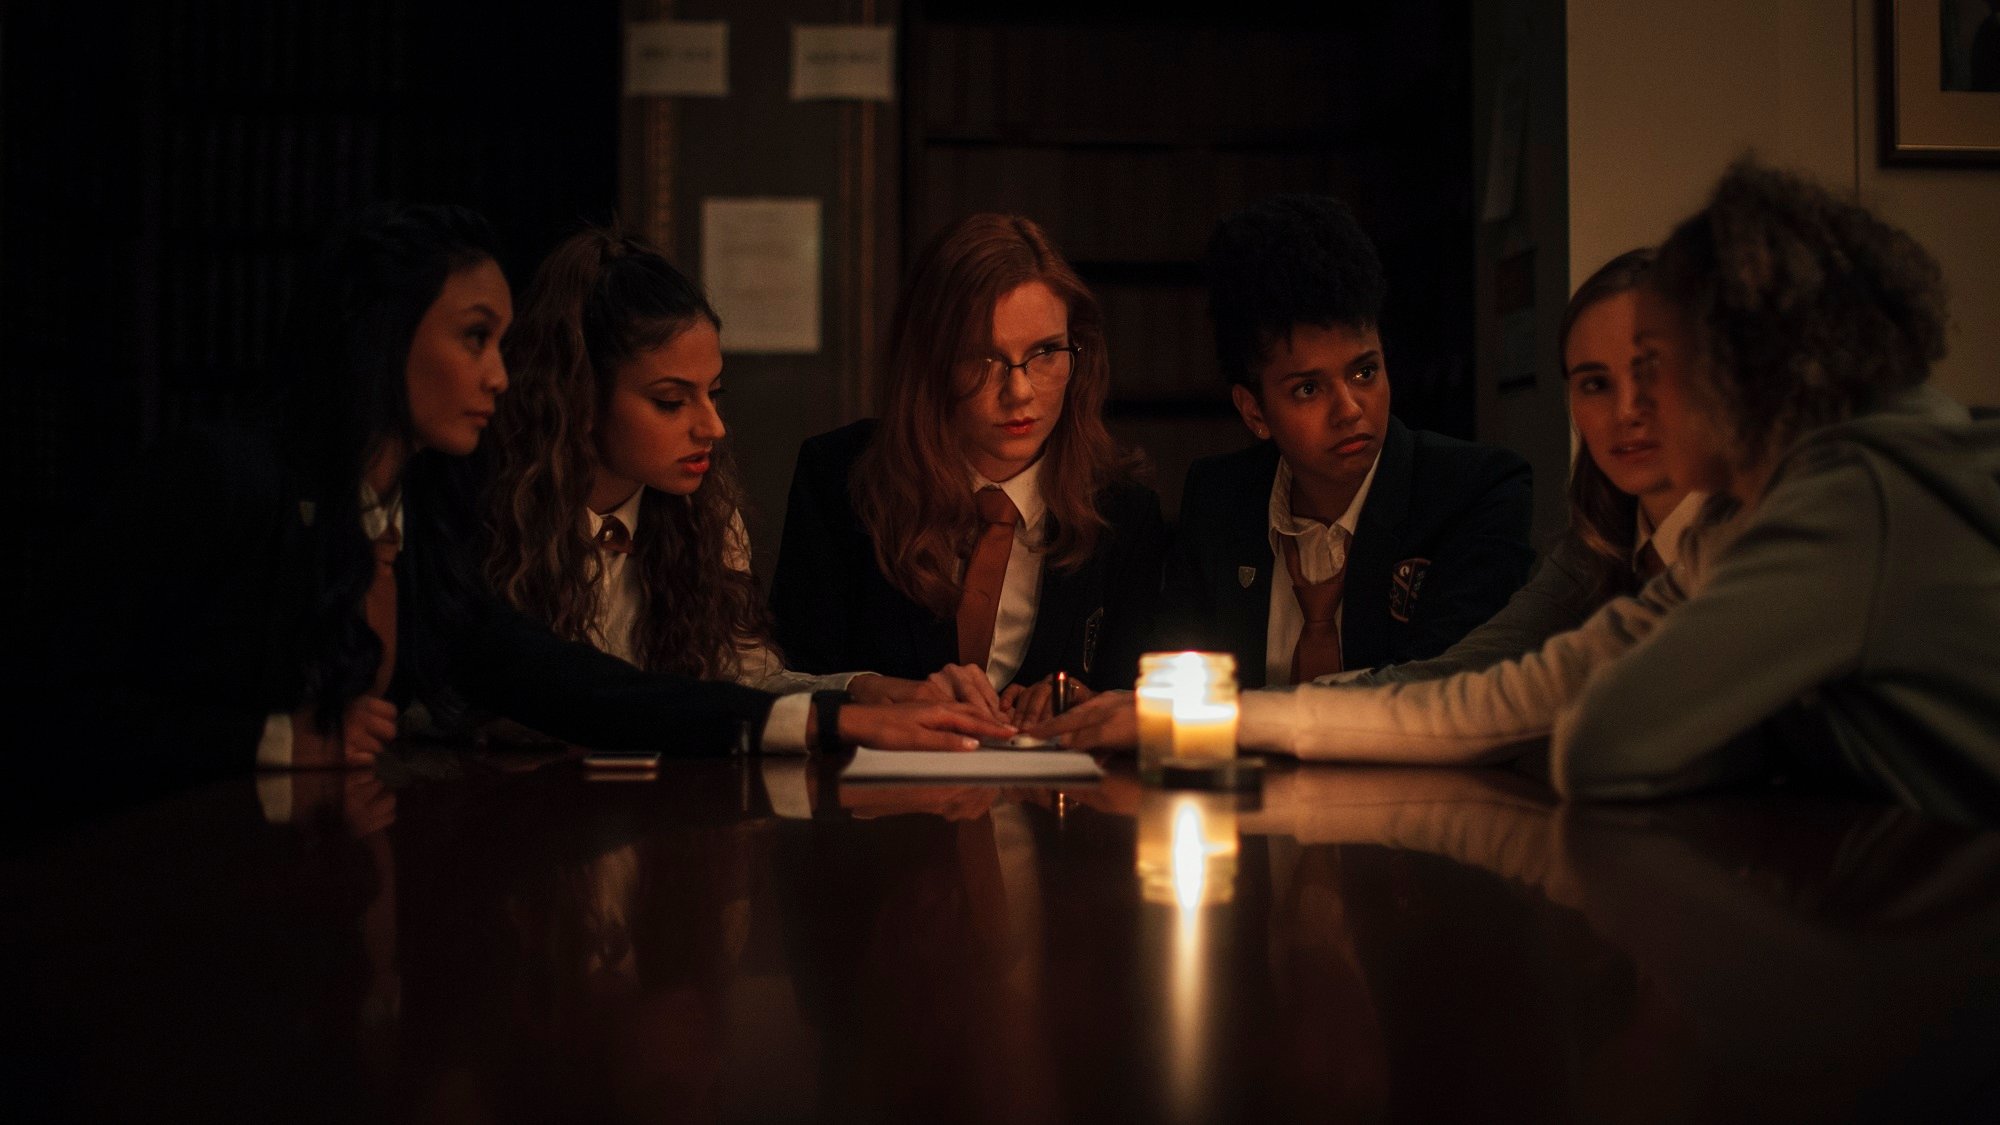 Horror movie Seance cast plays with a Ouija board